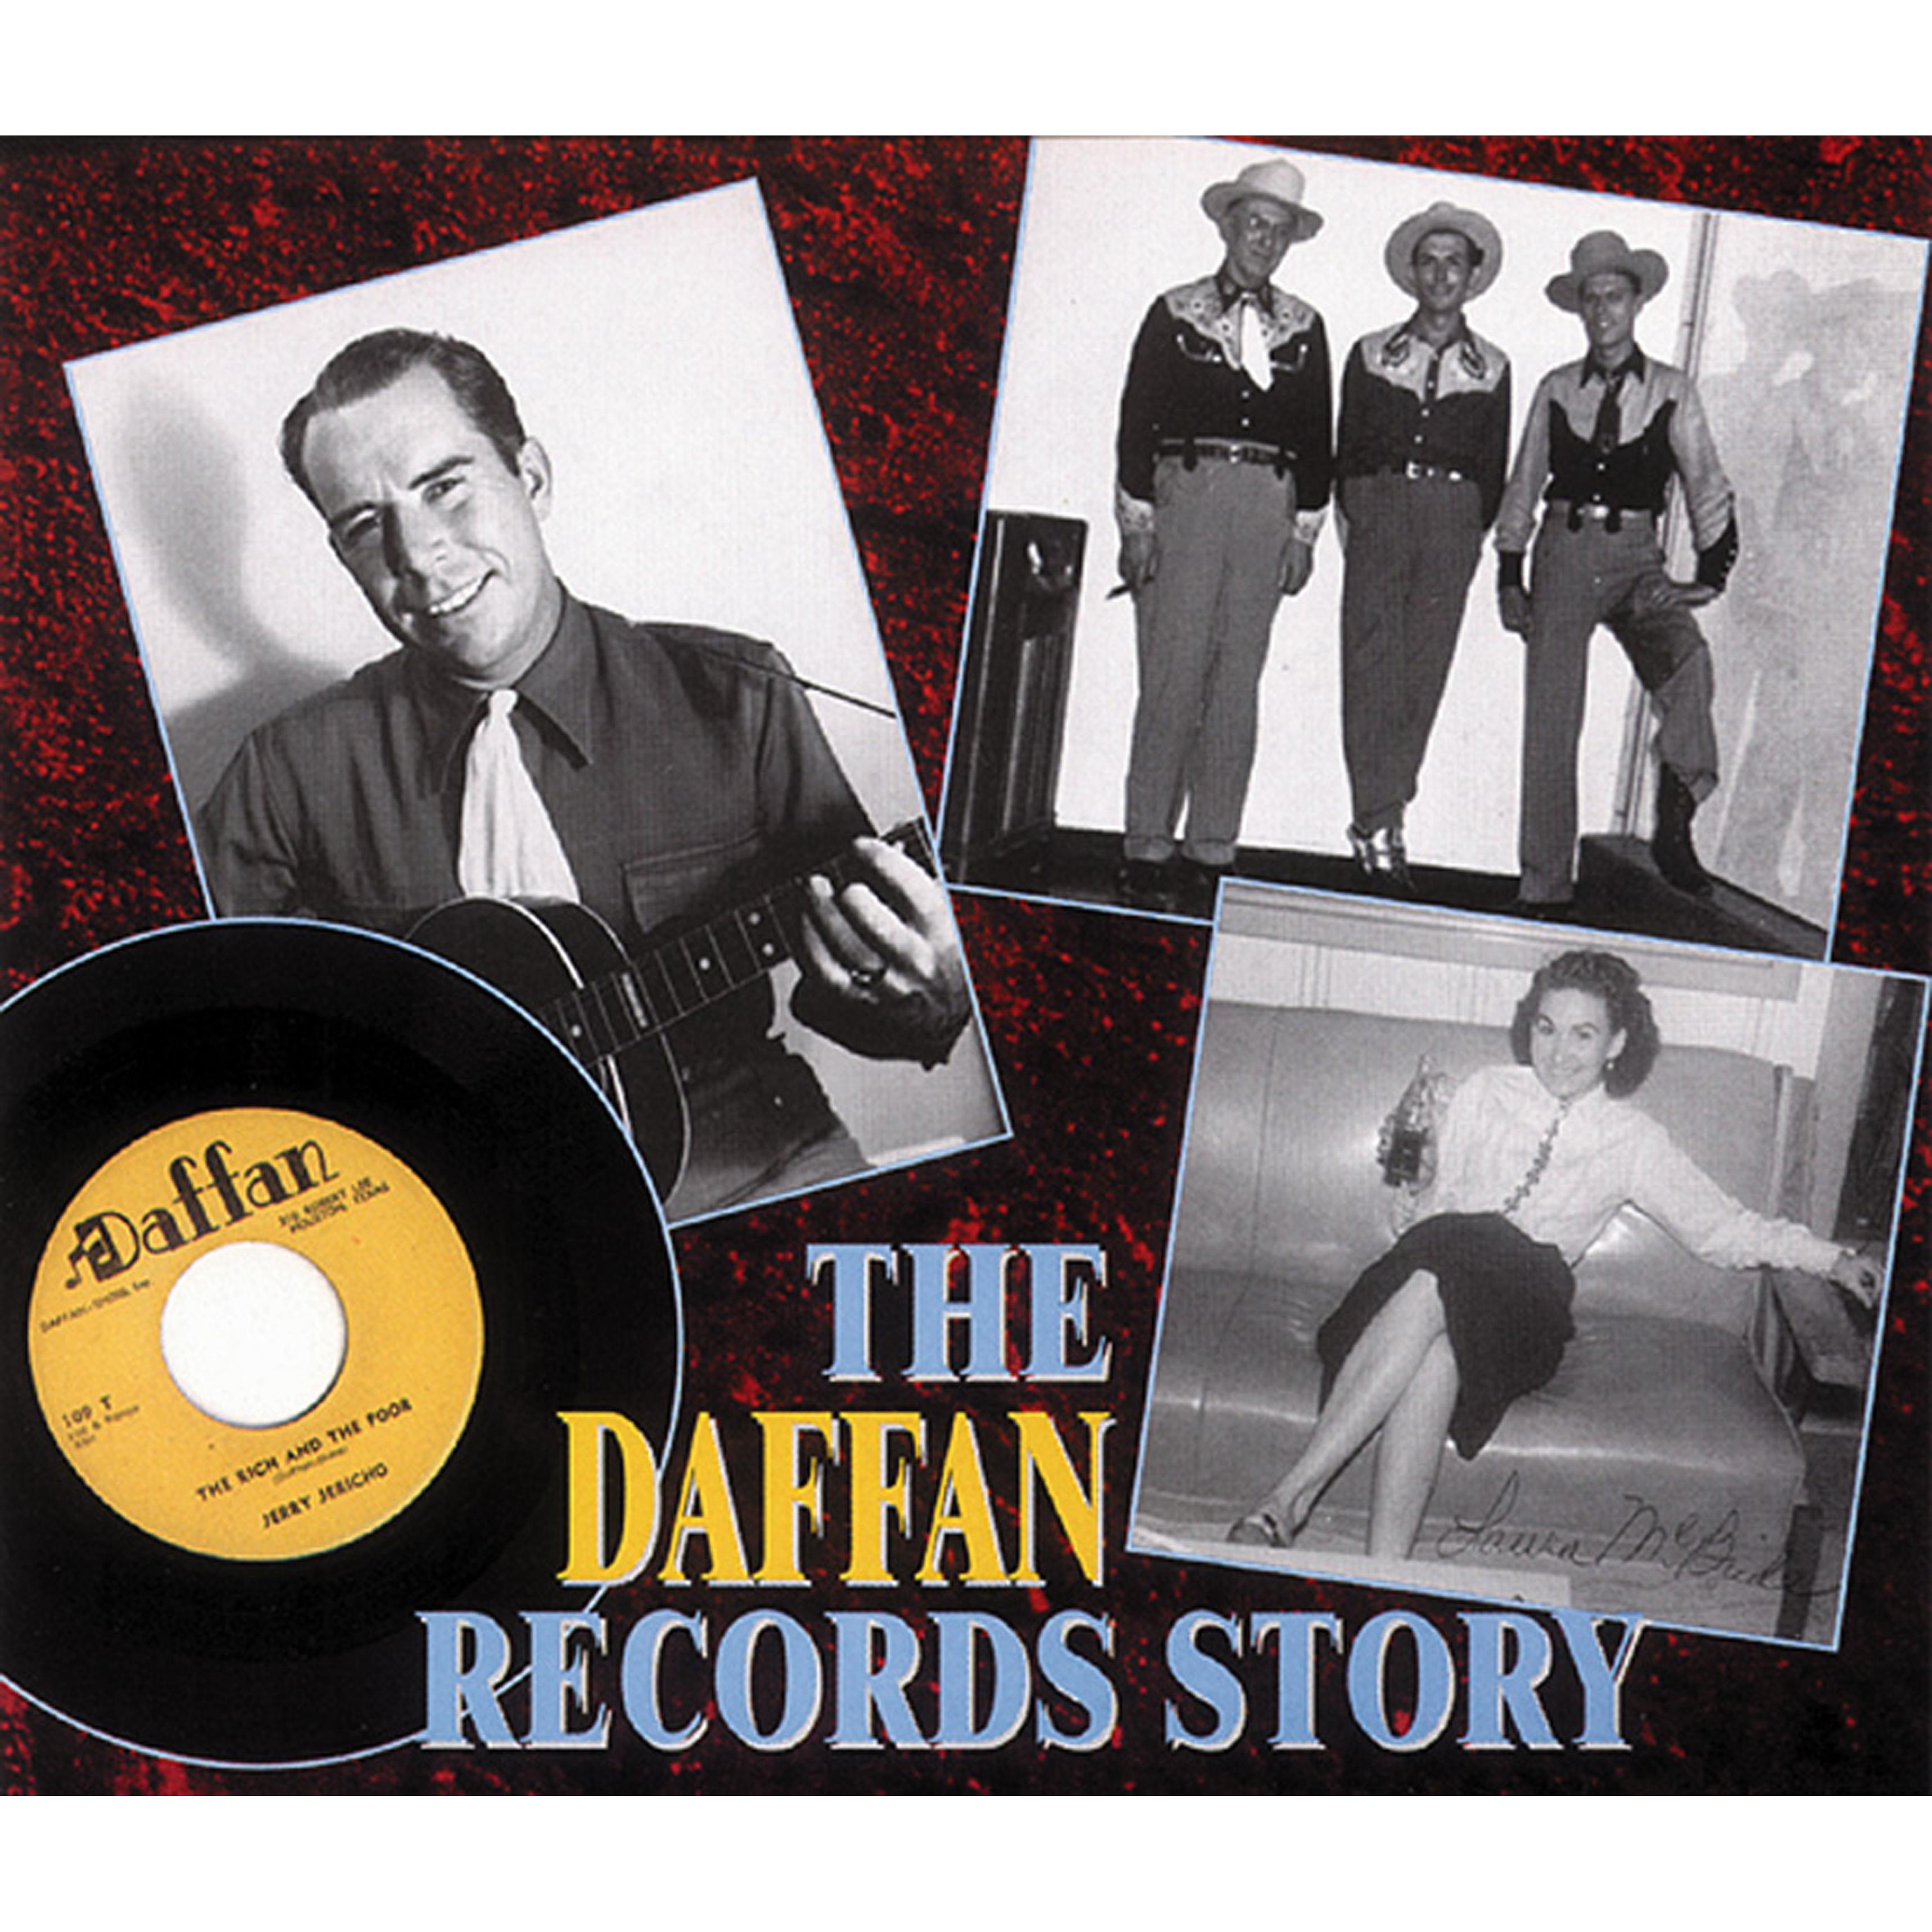 The Daffan Records Story